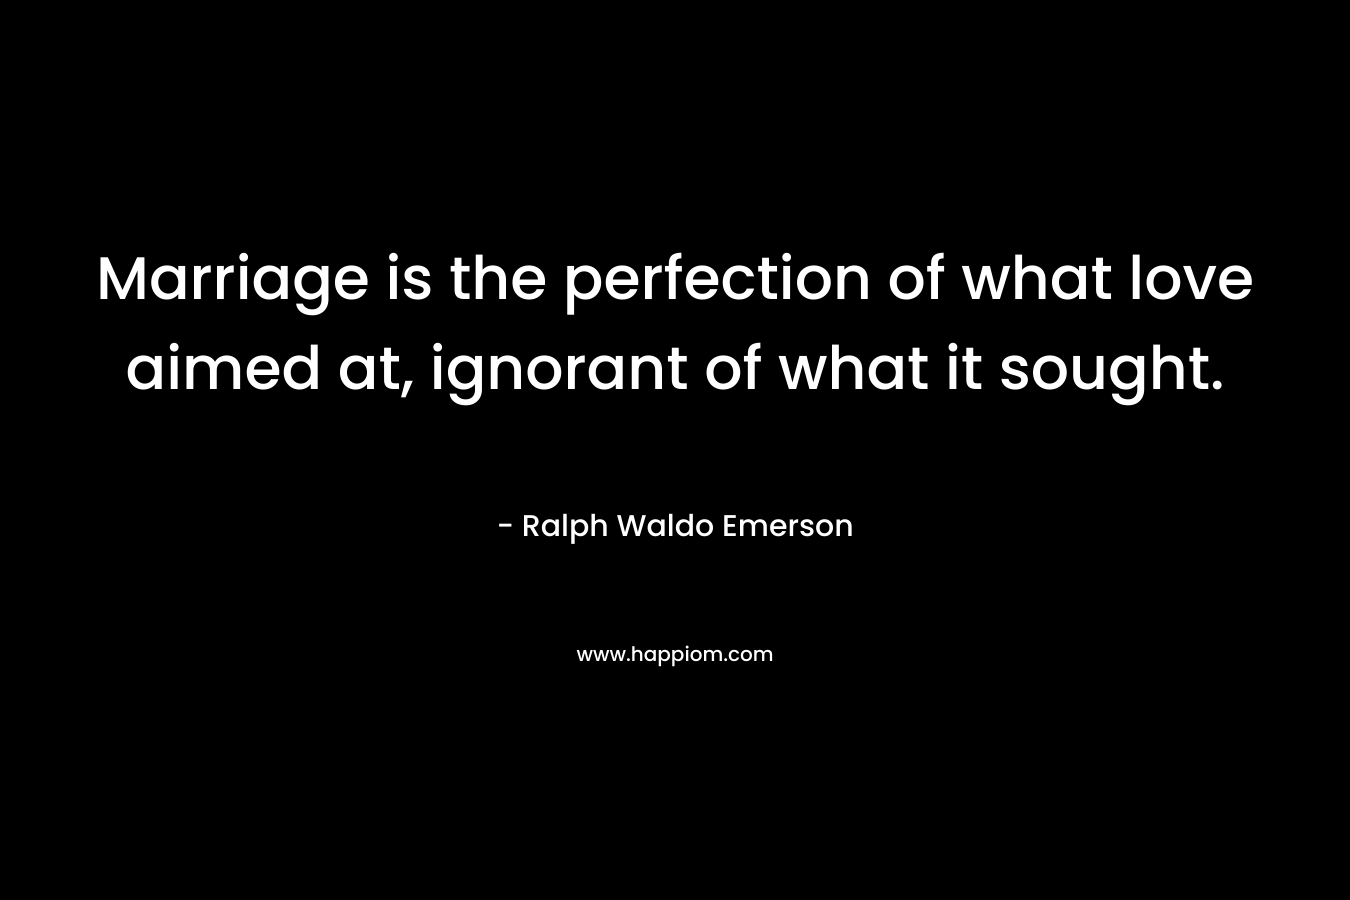 Marriage is the perfection of what love aimed at, ignorant of what it sought. – Ralph Waldo Emerson